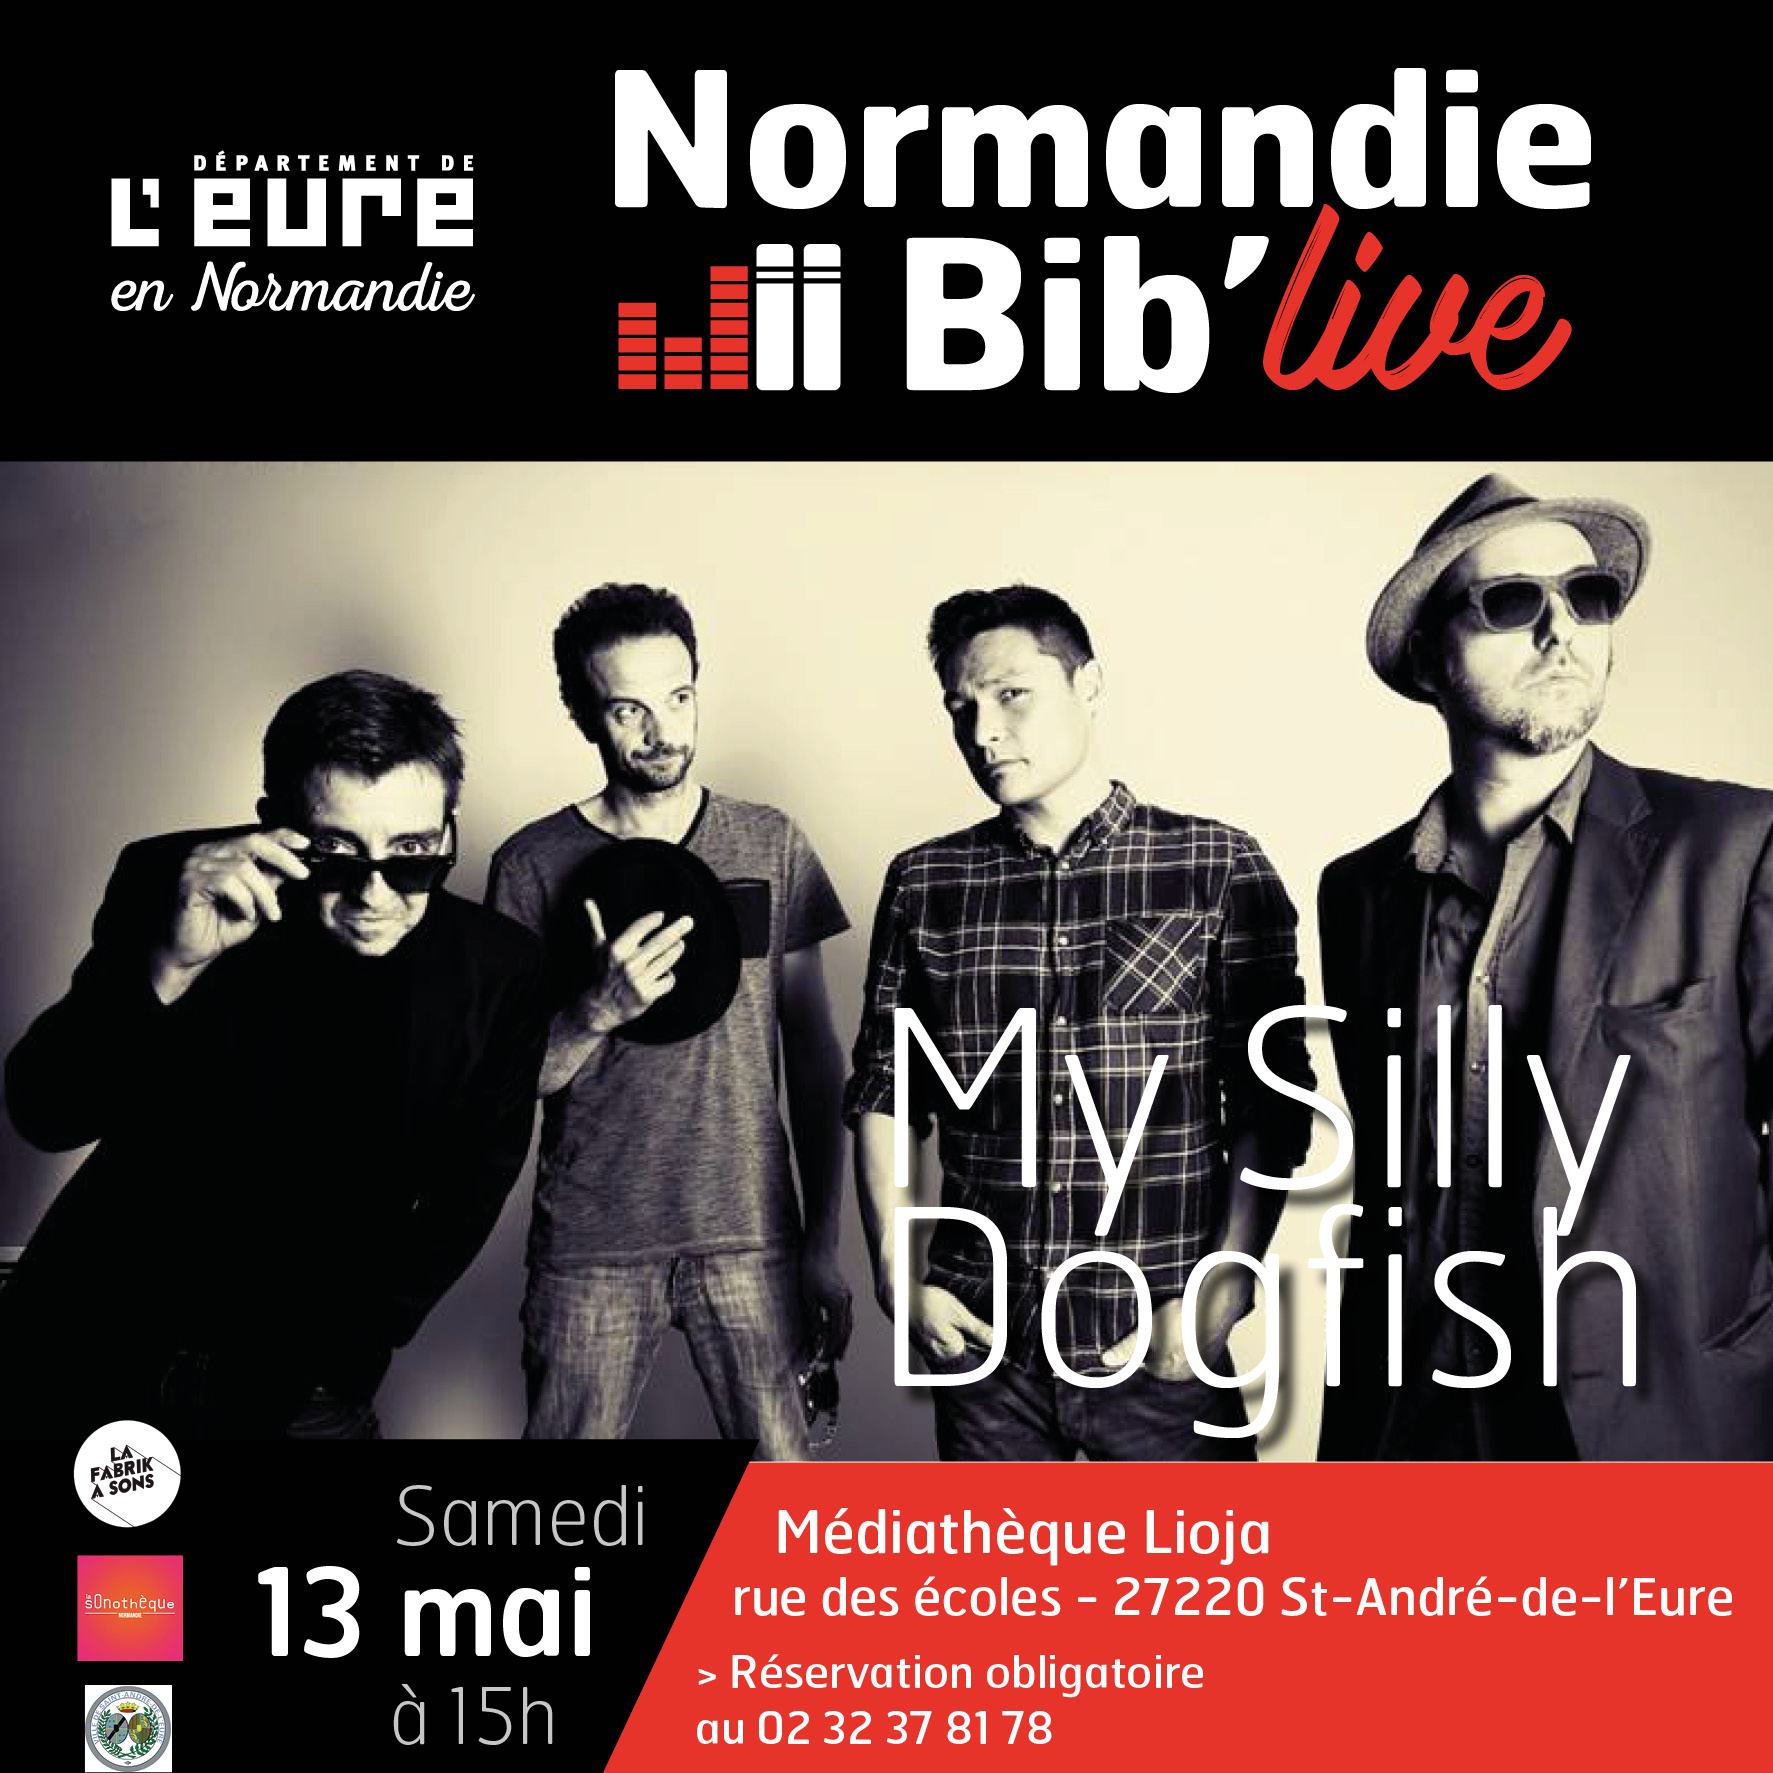 historique 2017 normandie biblive silly dogfish